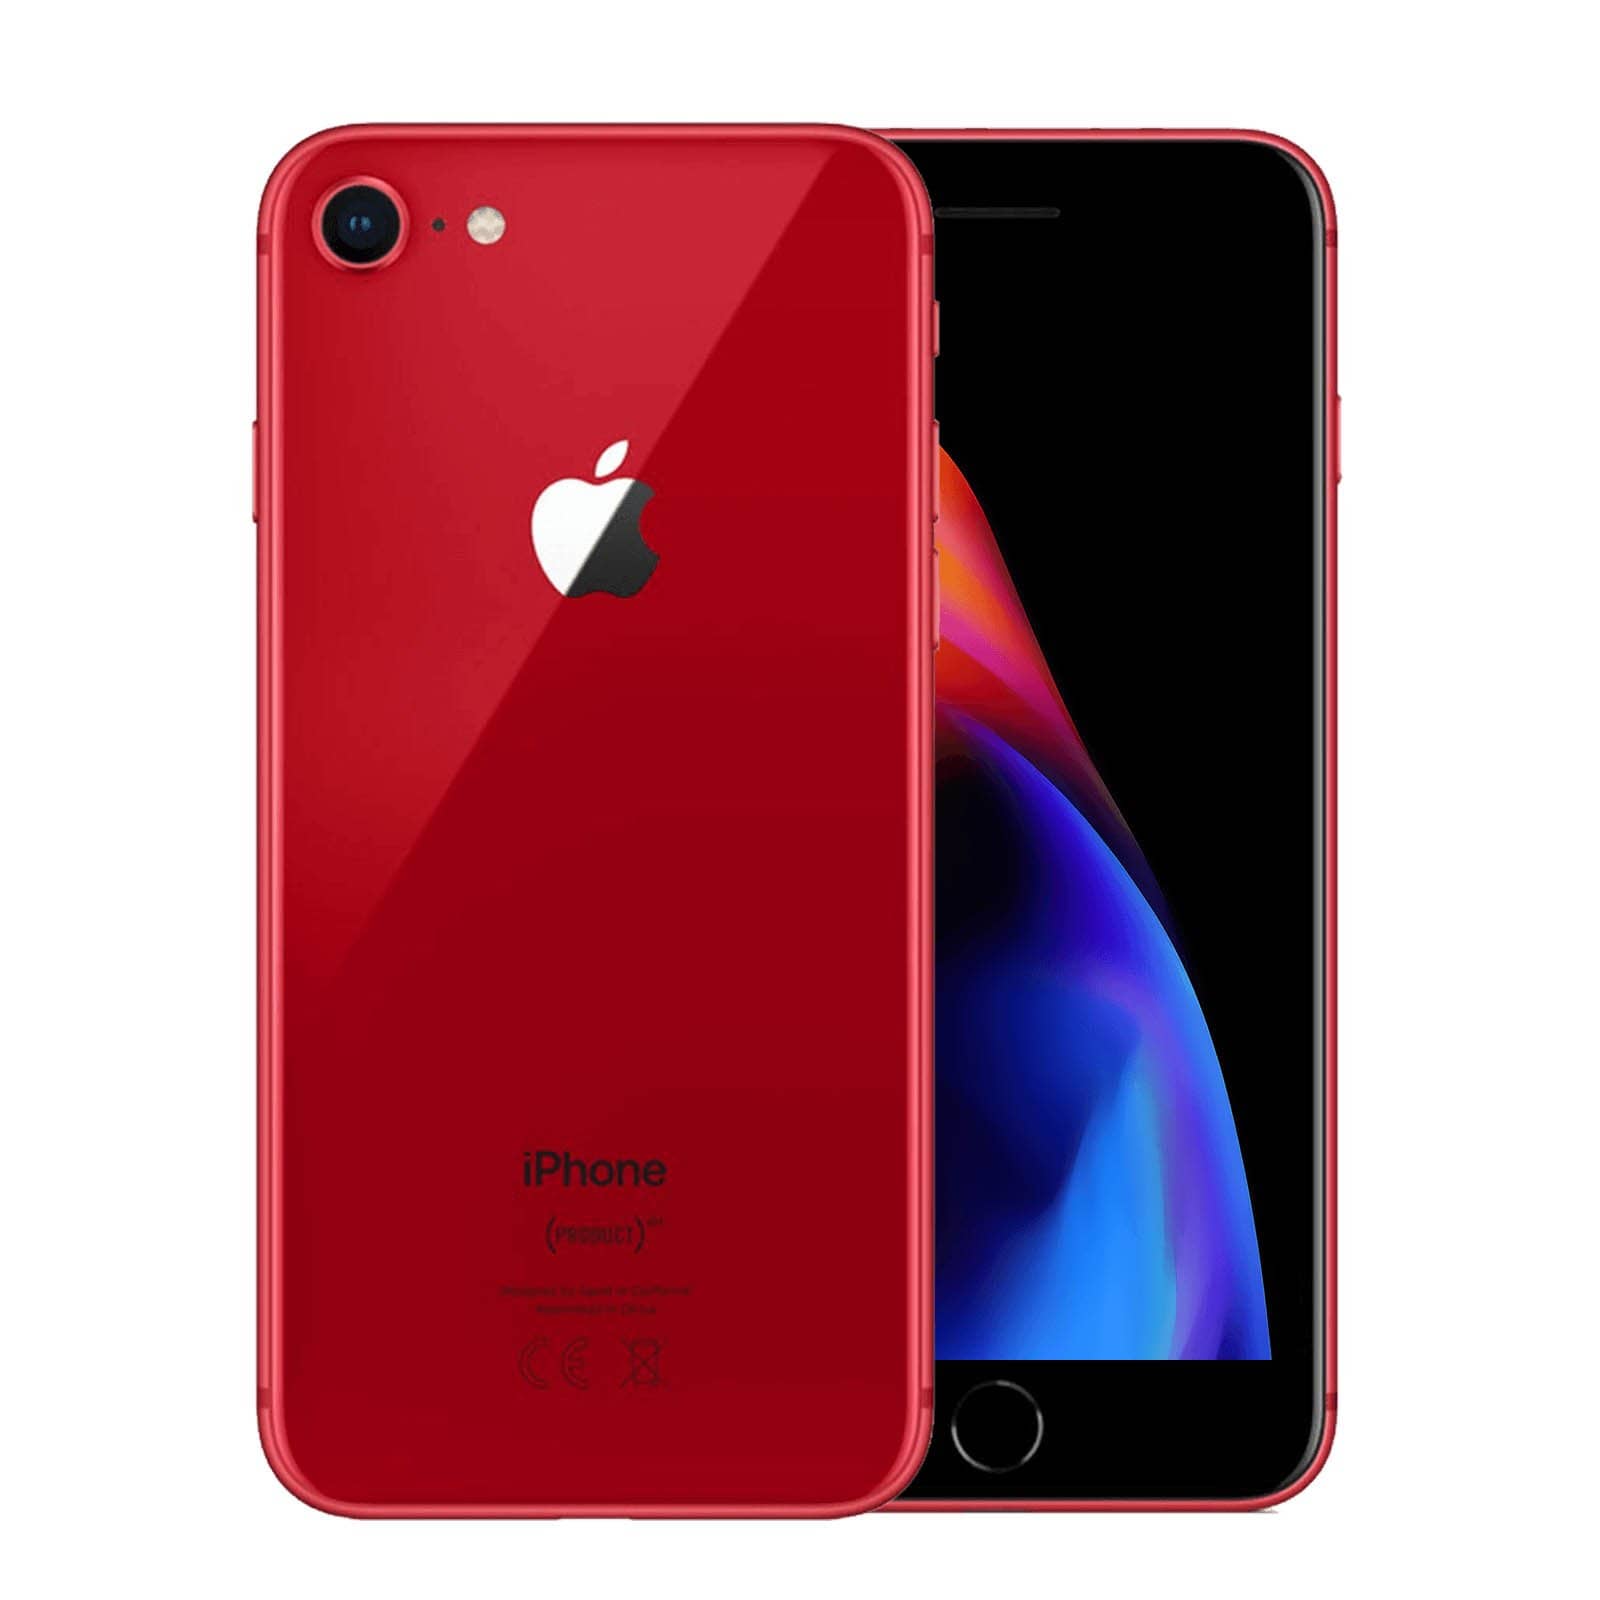 Apple iPhone 8 256GB Product Red Fair - Unlocked 256GB Product Red Fair